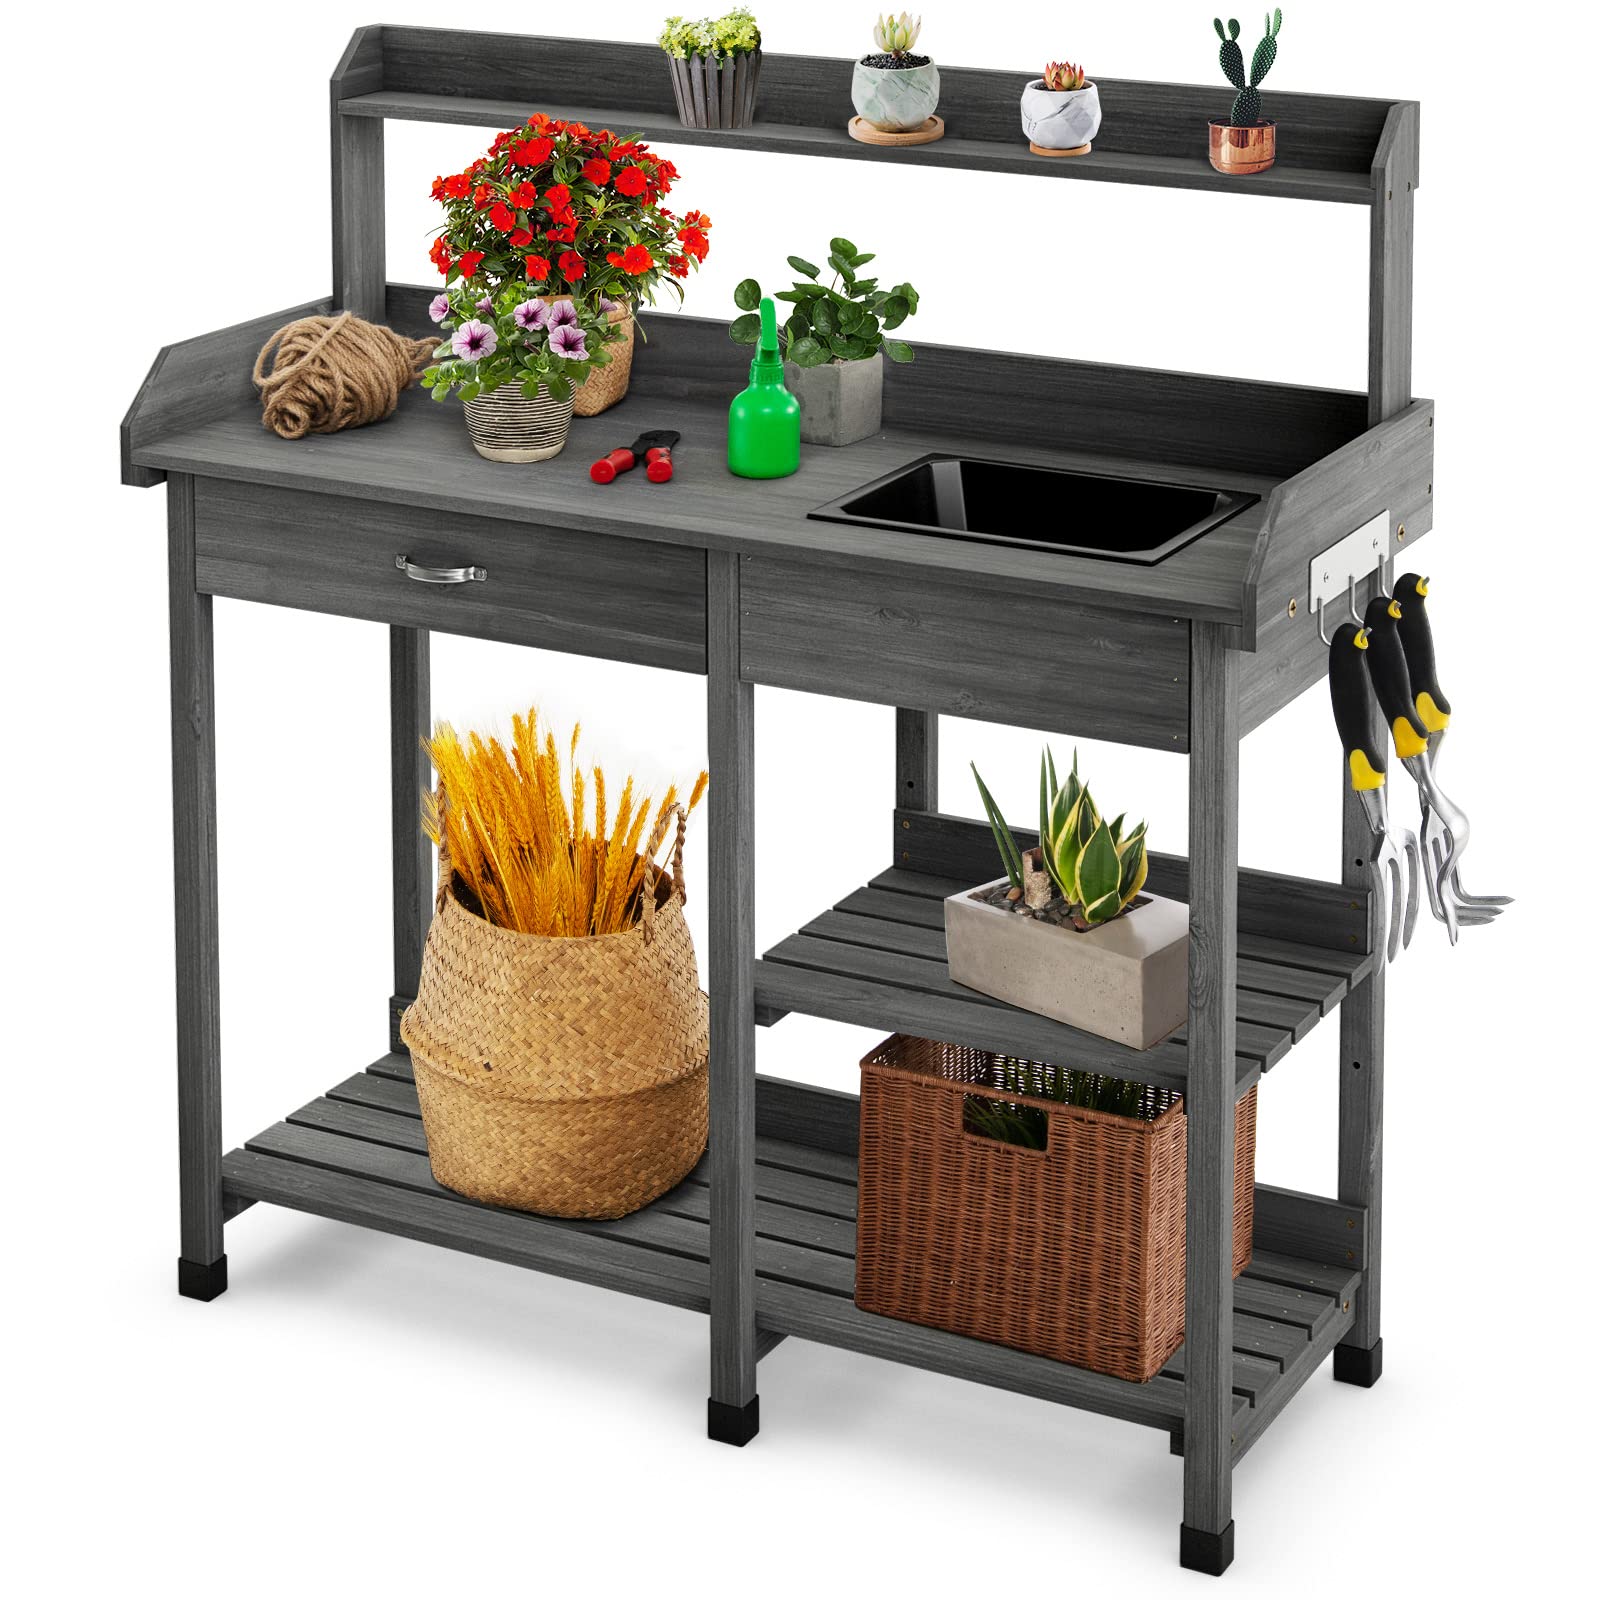 Giantex Potting Bench Table, Wood Garden Work Table with Sink Drawer Hooks and 3 Storage Shelves